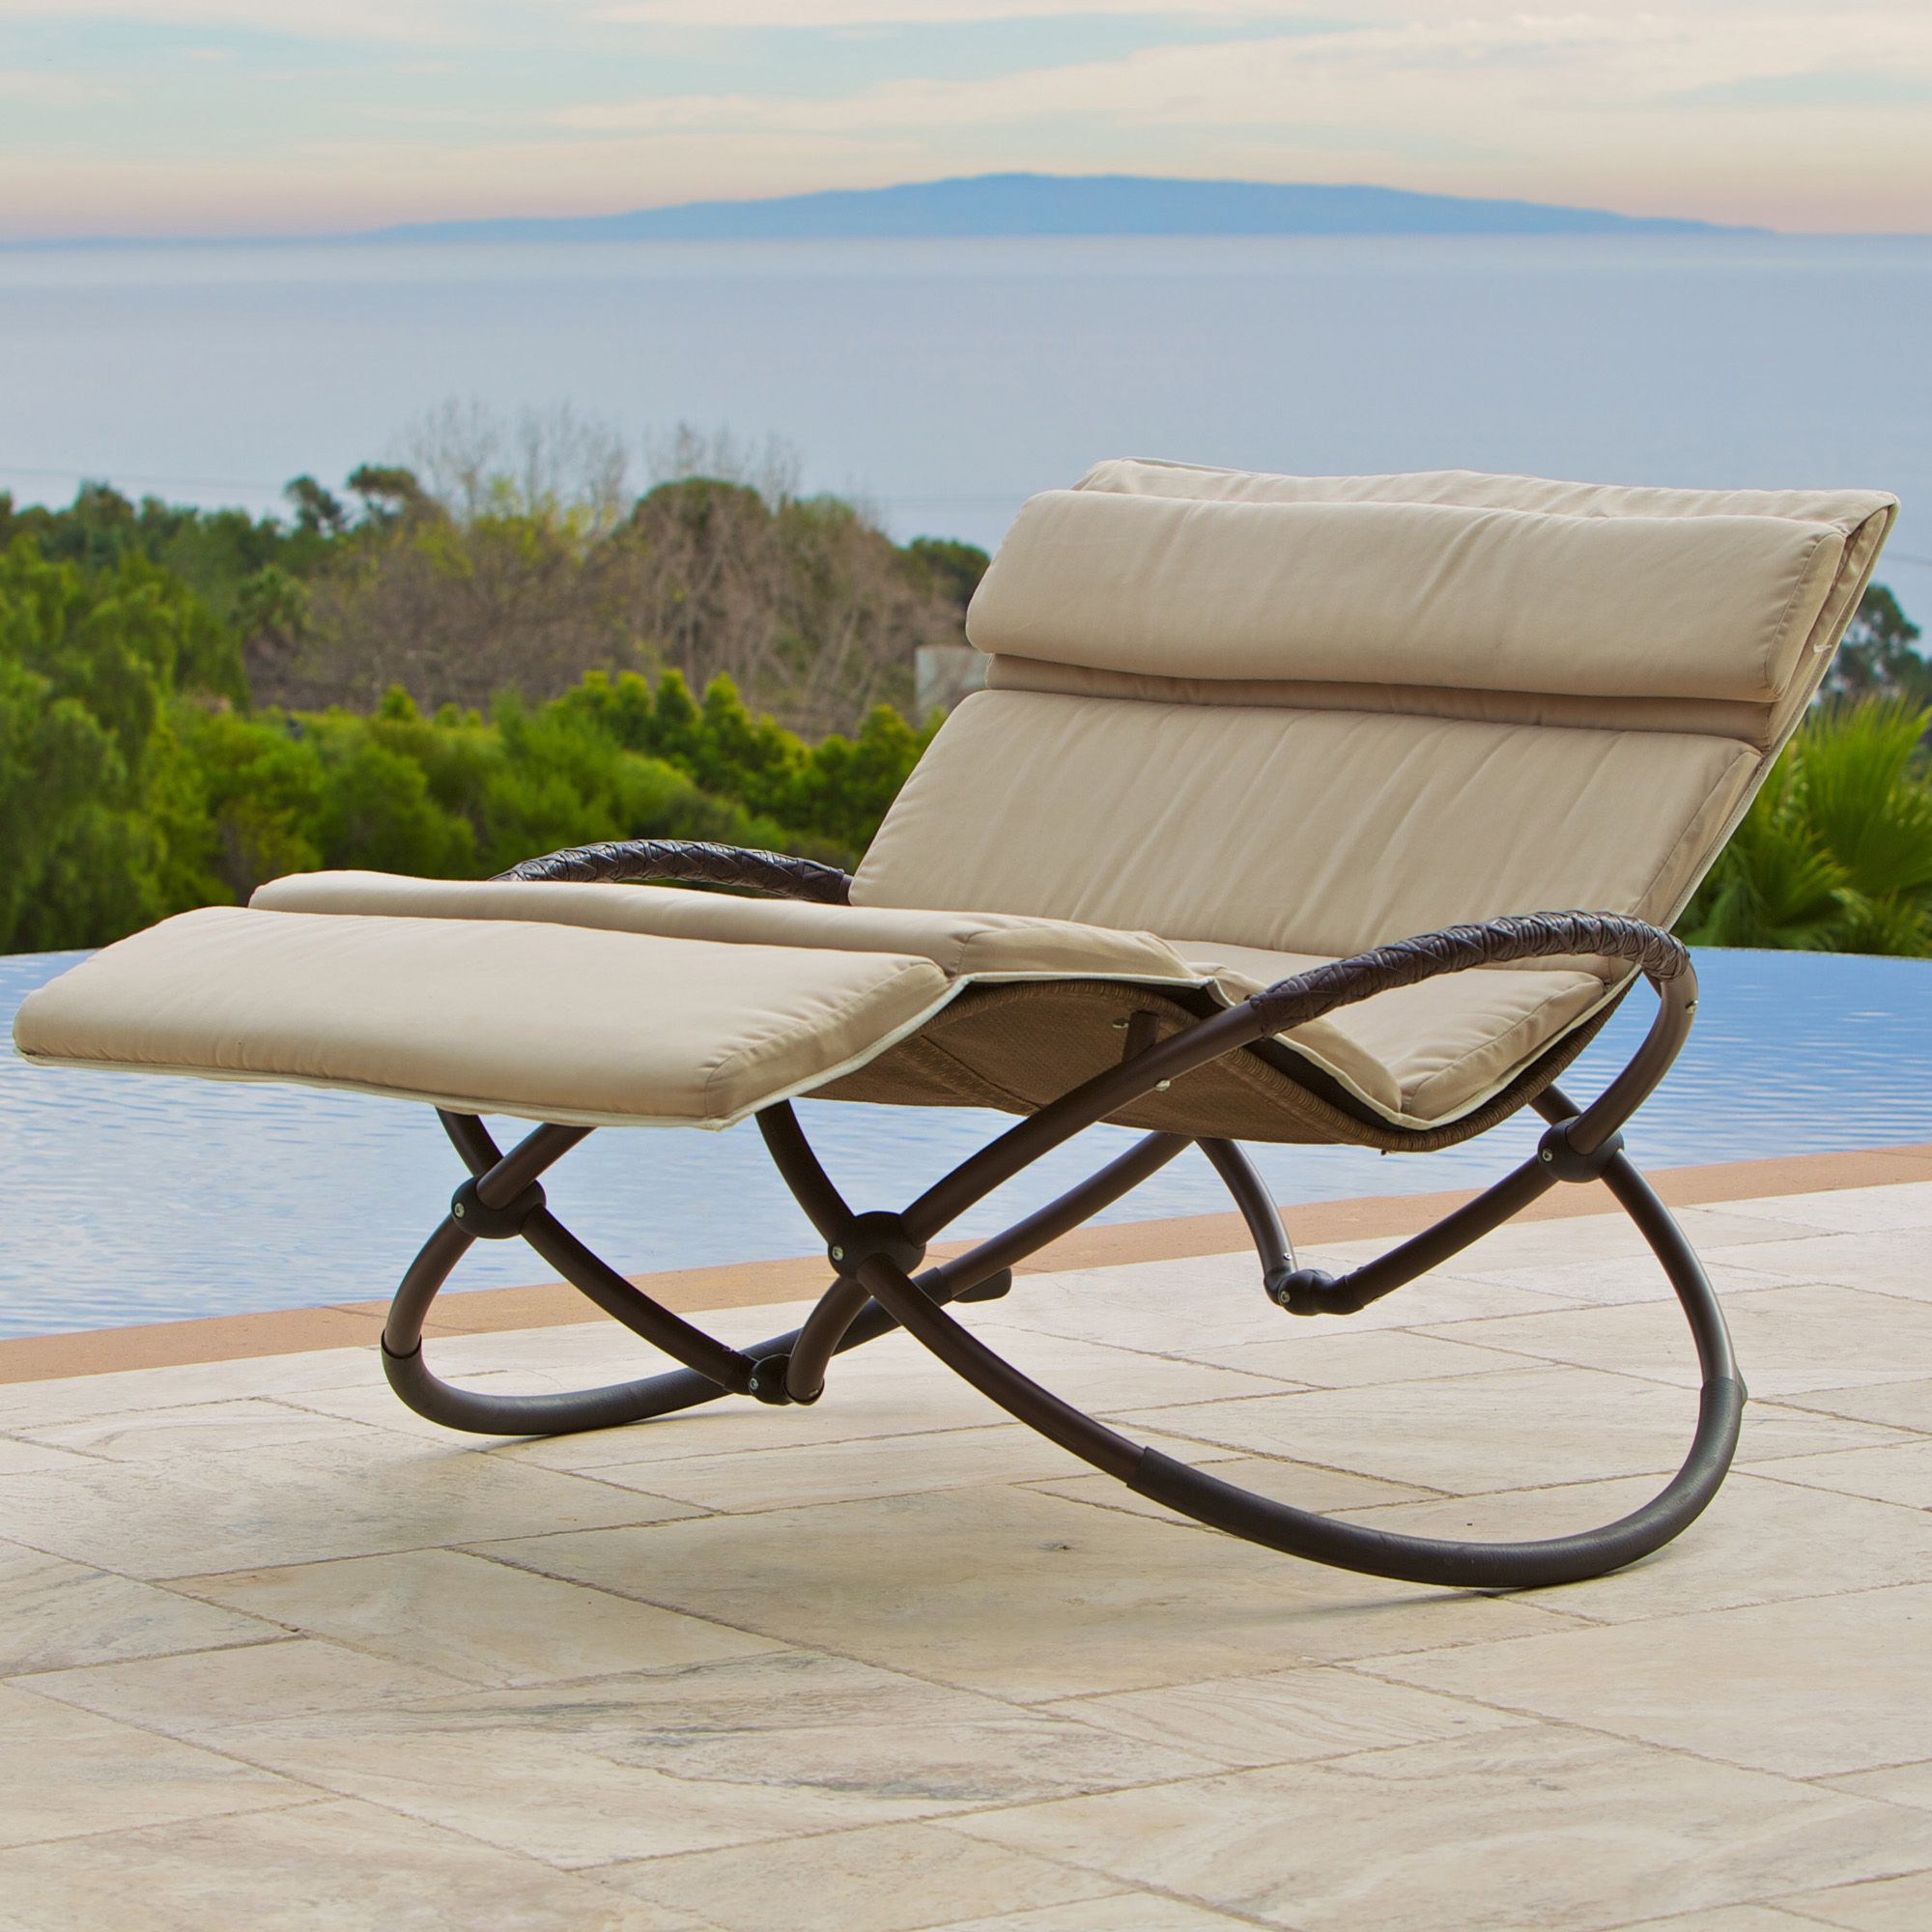 RST Brands Delano Double Orbital Lounger with Cushion Set